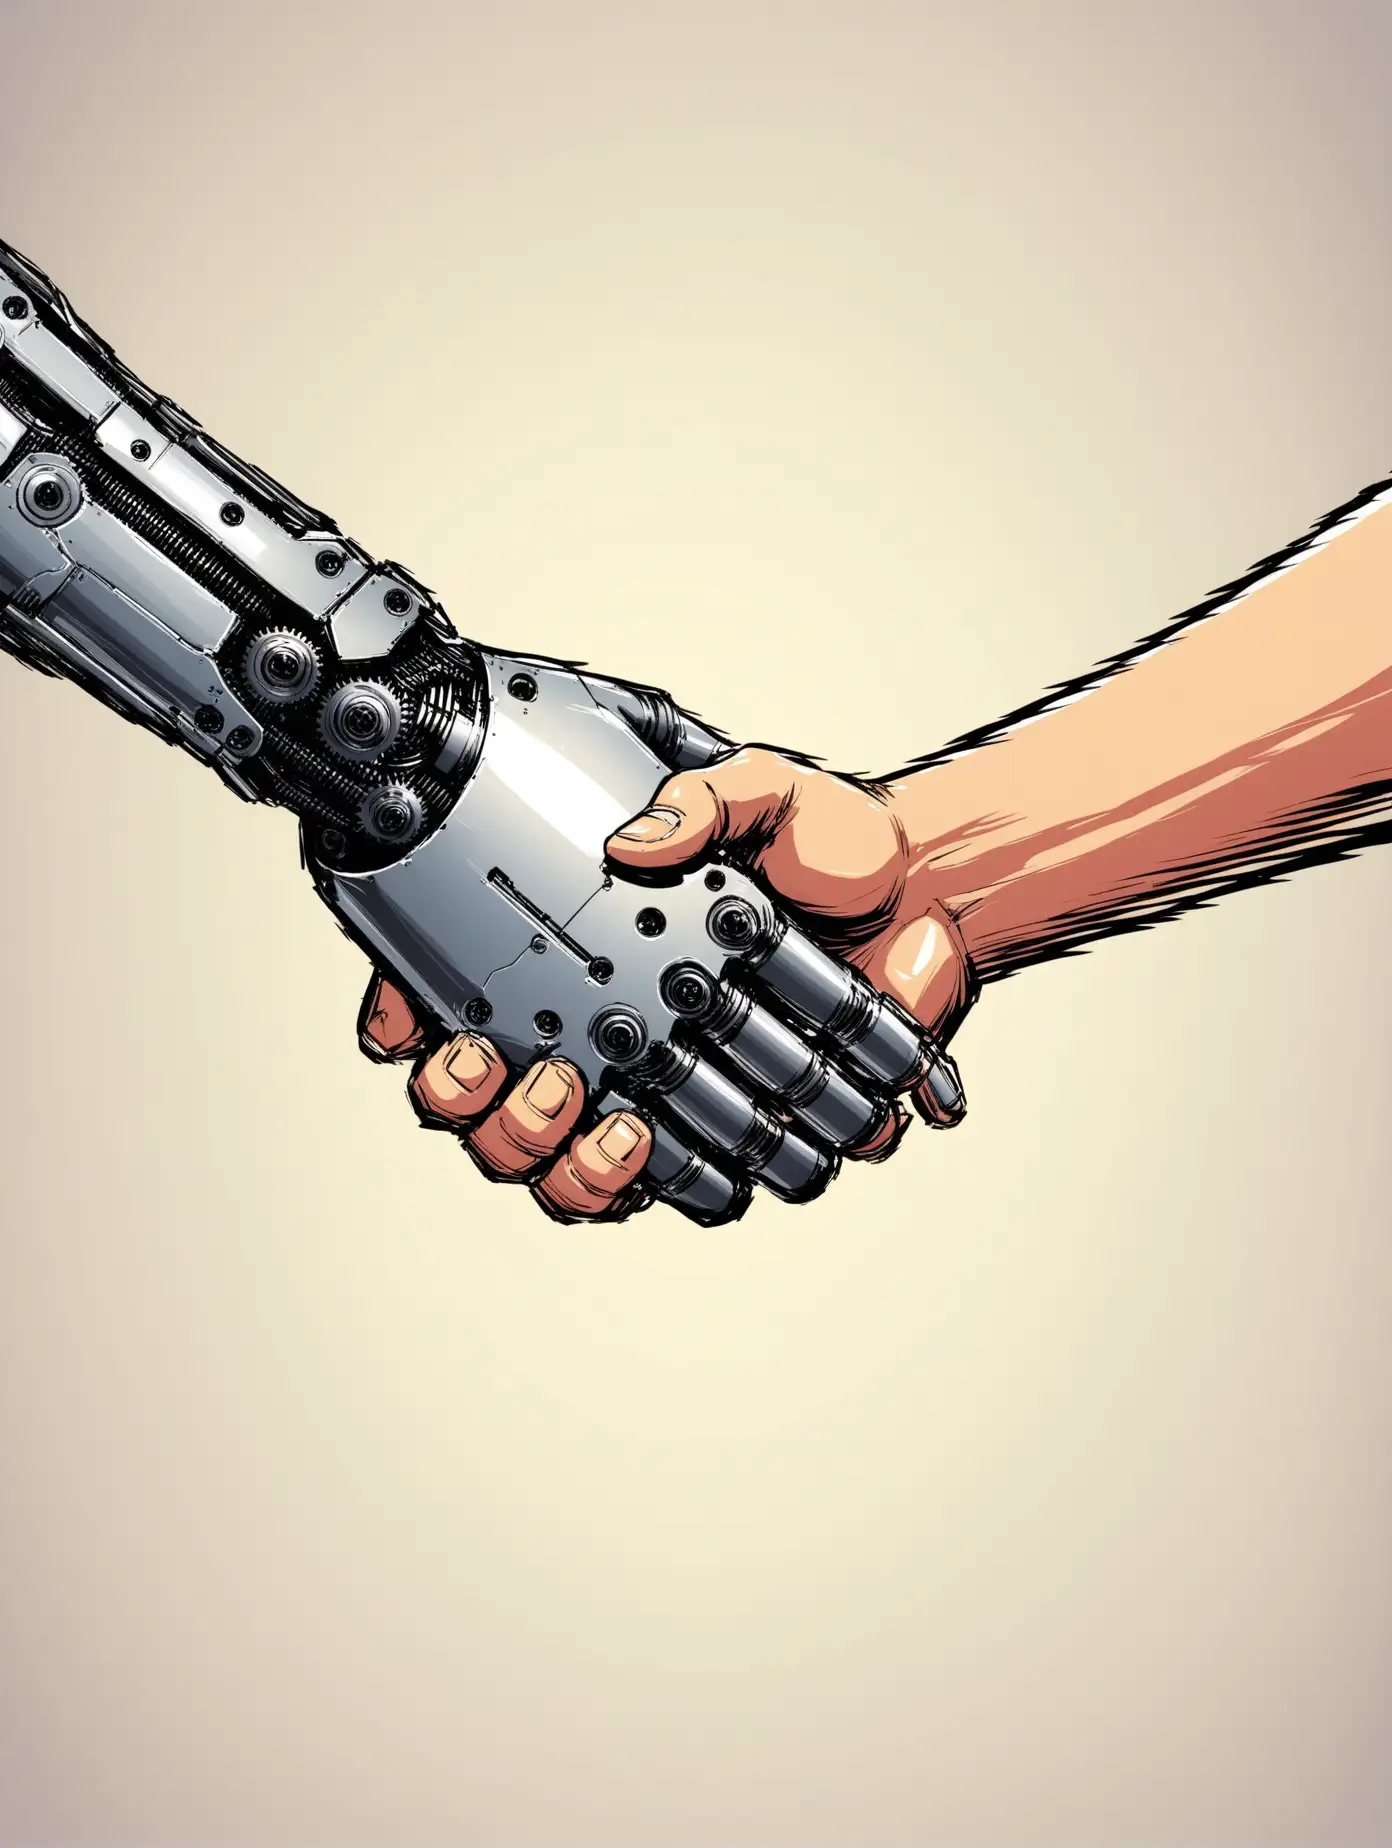 Human and Robot Hands Shake in Agreement